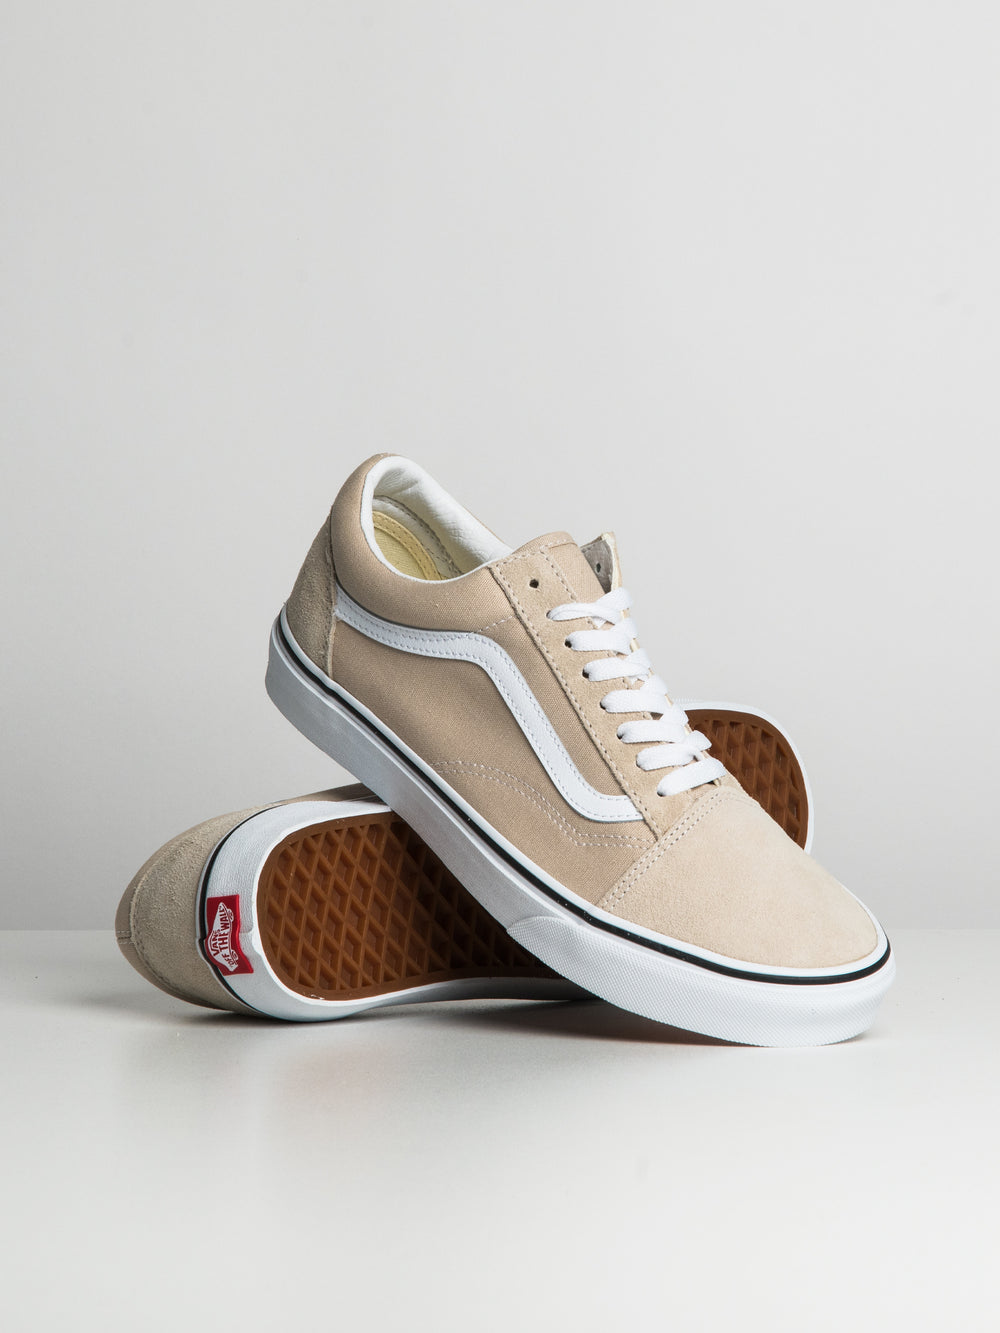 MENS VANS OLD SKOOL COLOUR THEORY - CLEARANCE